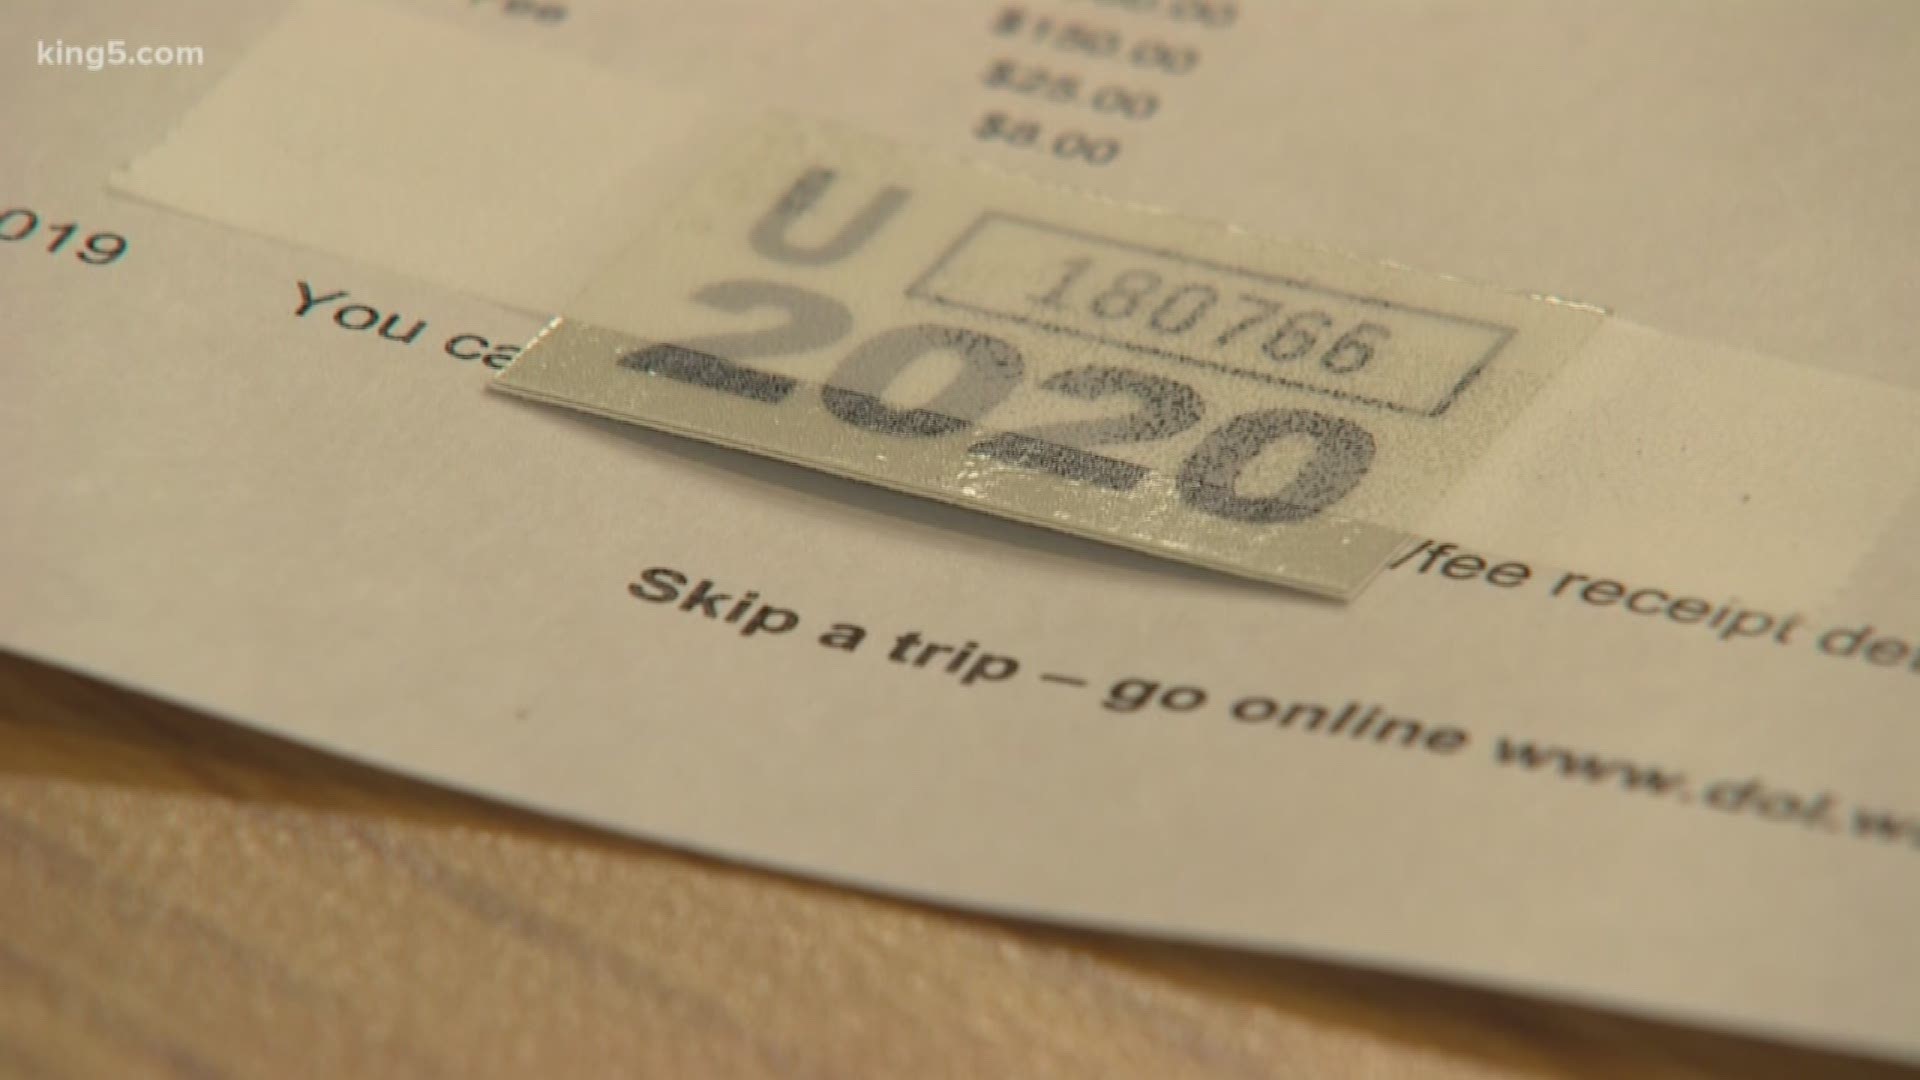 Washington's Department of Licensing says vehicle owners should pay their car-tab fees in full until it can figure out the full effects of Initiative 976.